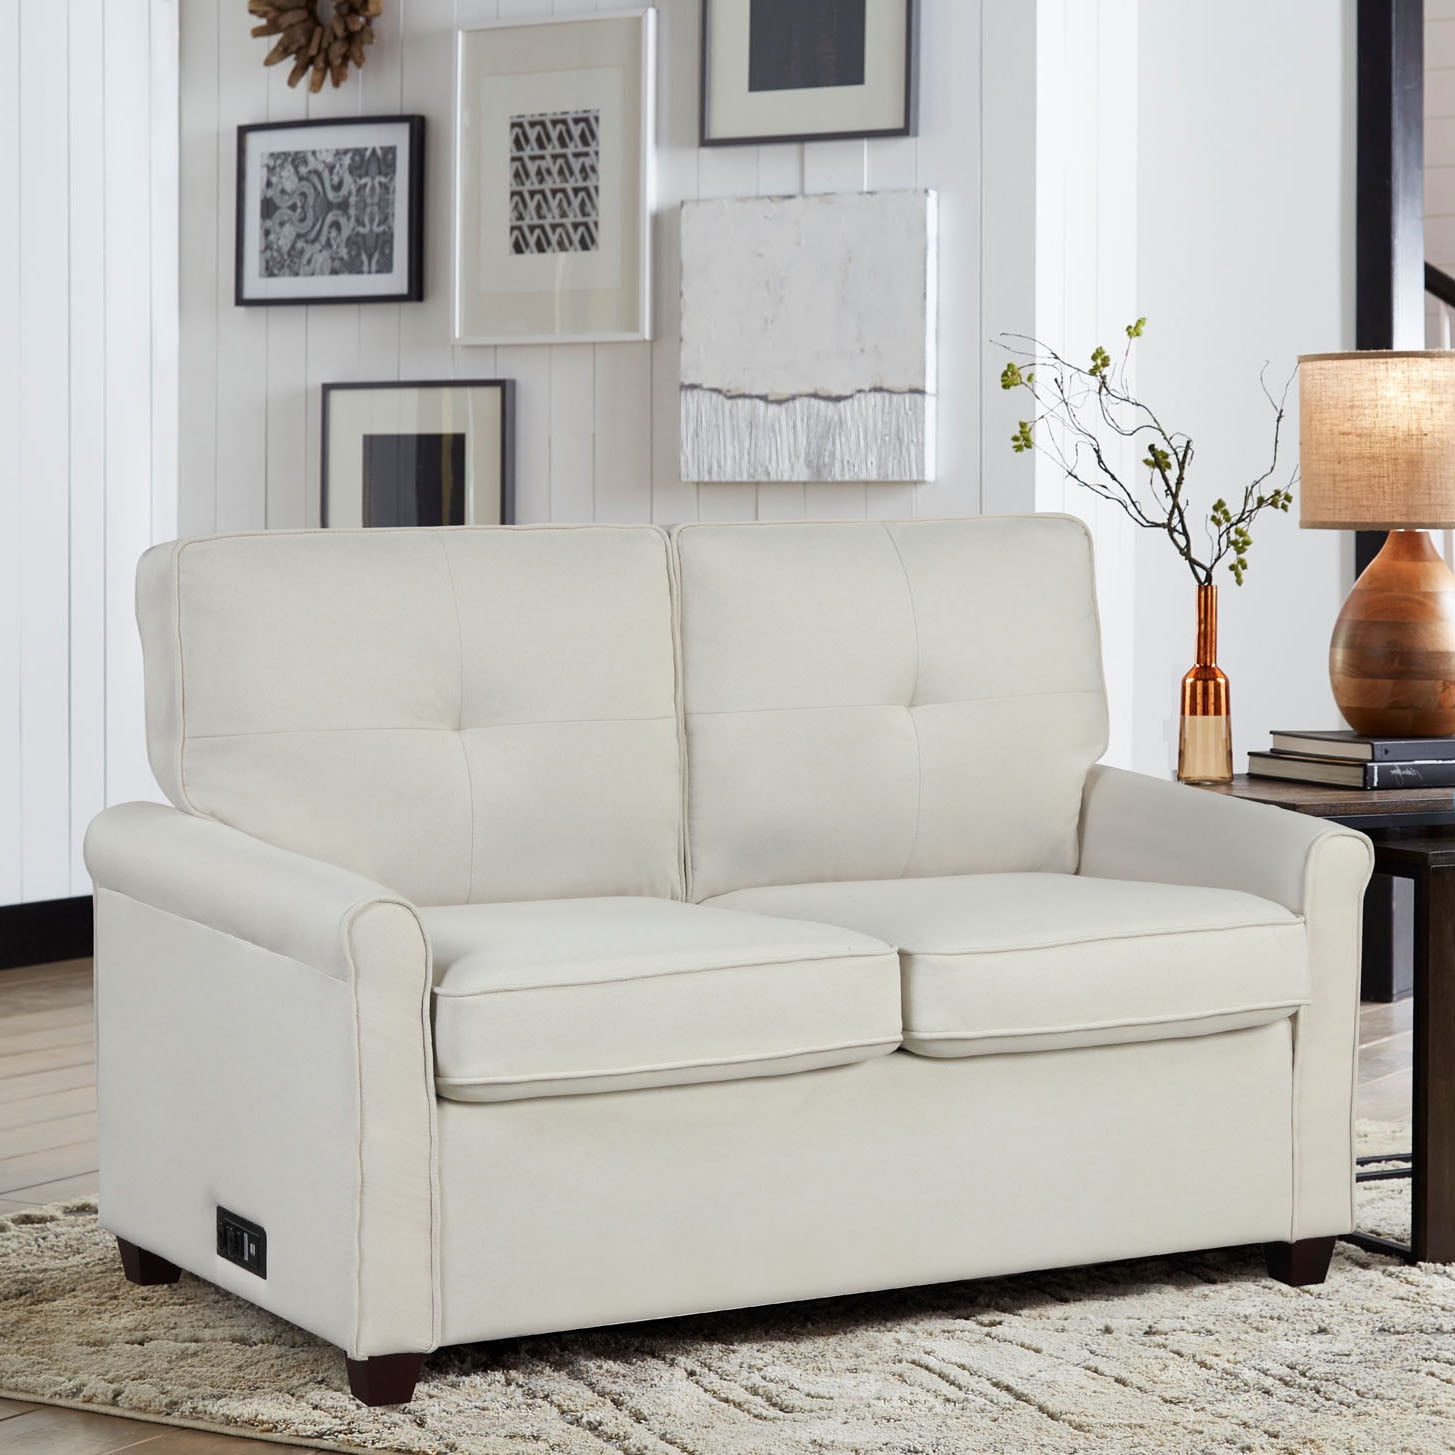 Anton Look Loveseat Power, Lifestyle Solutions Beige with Linen